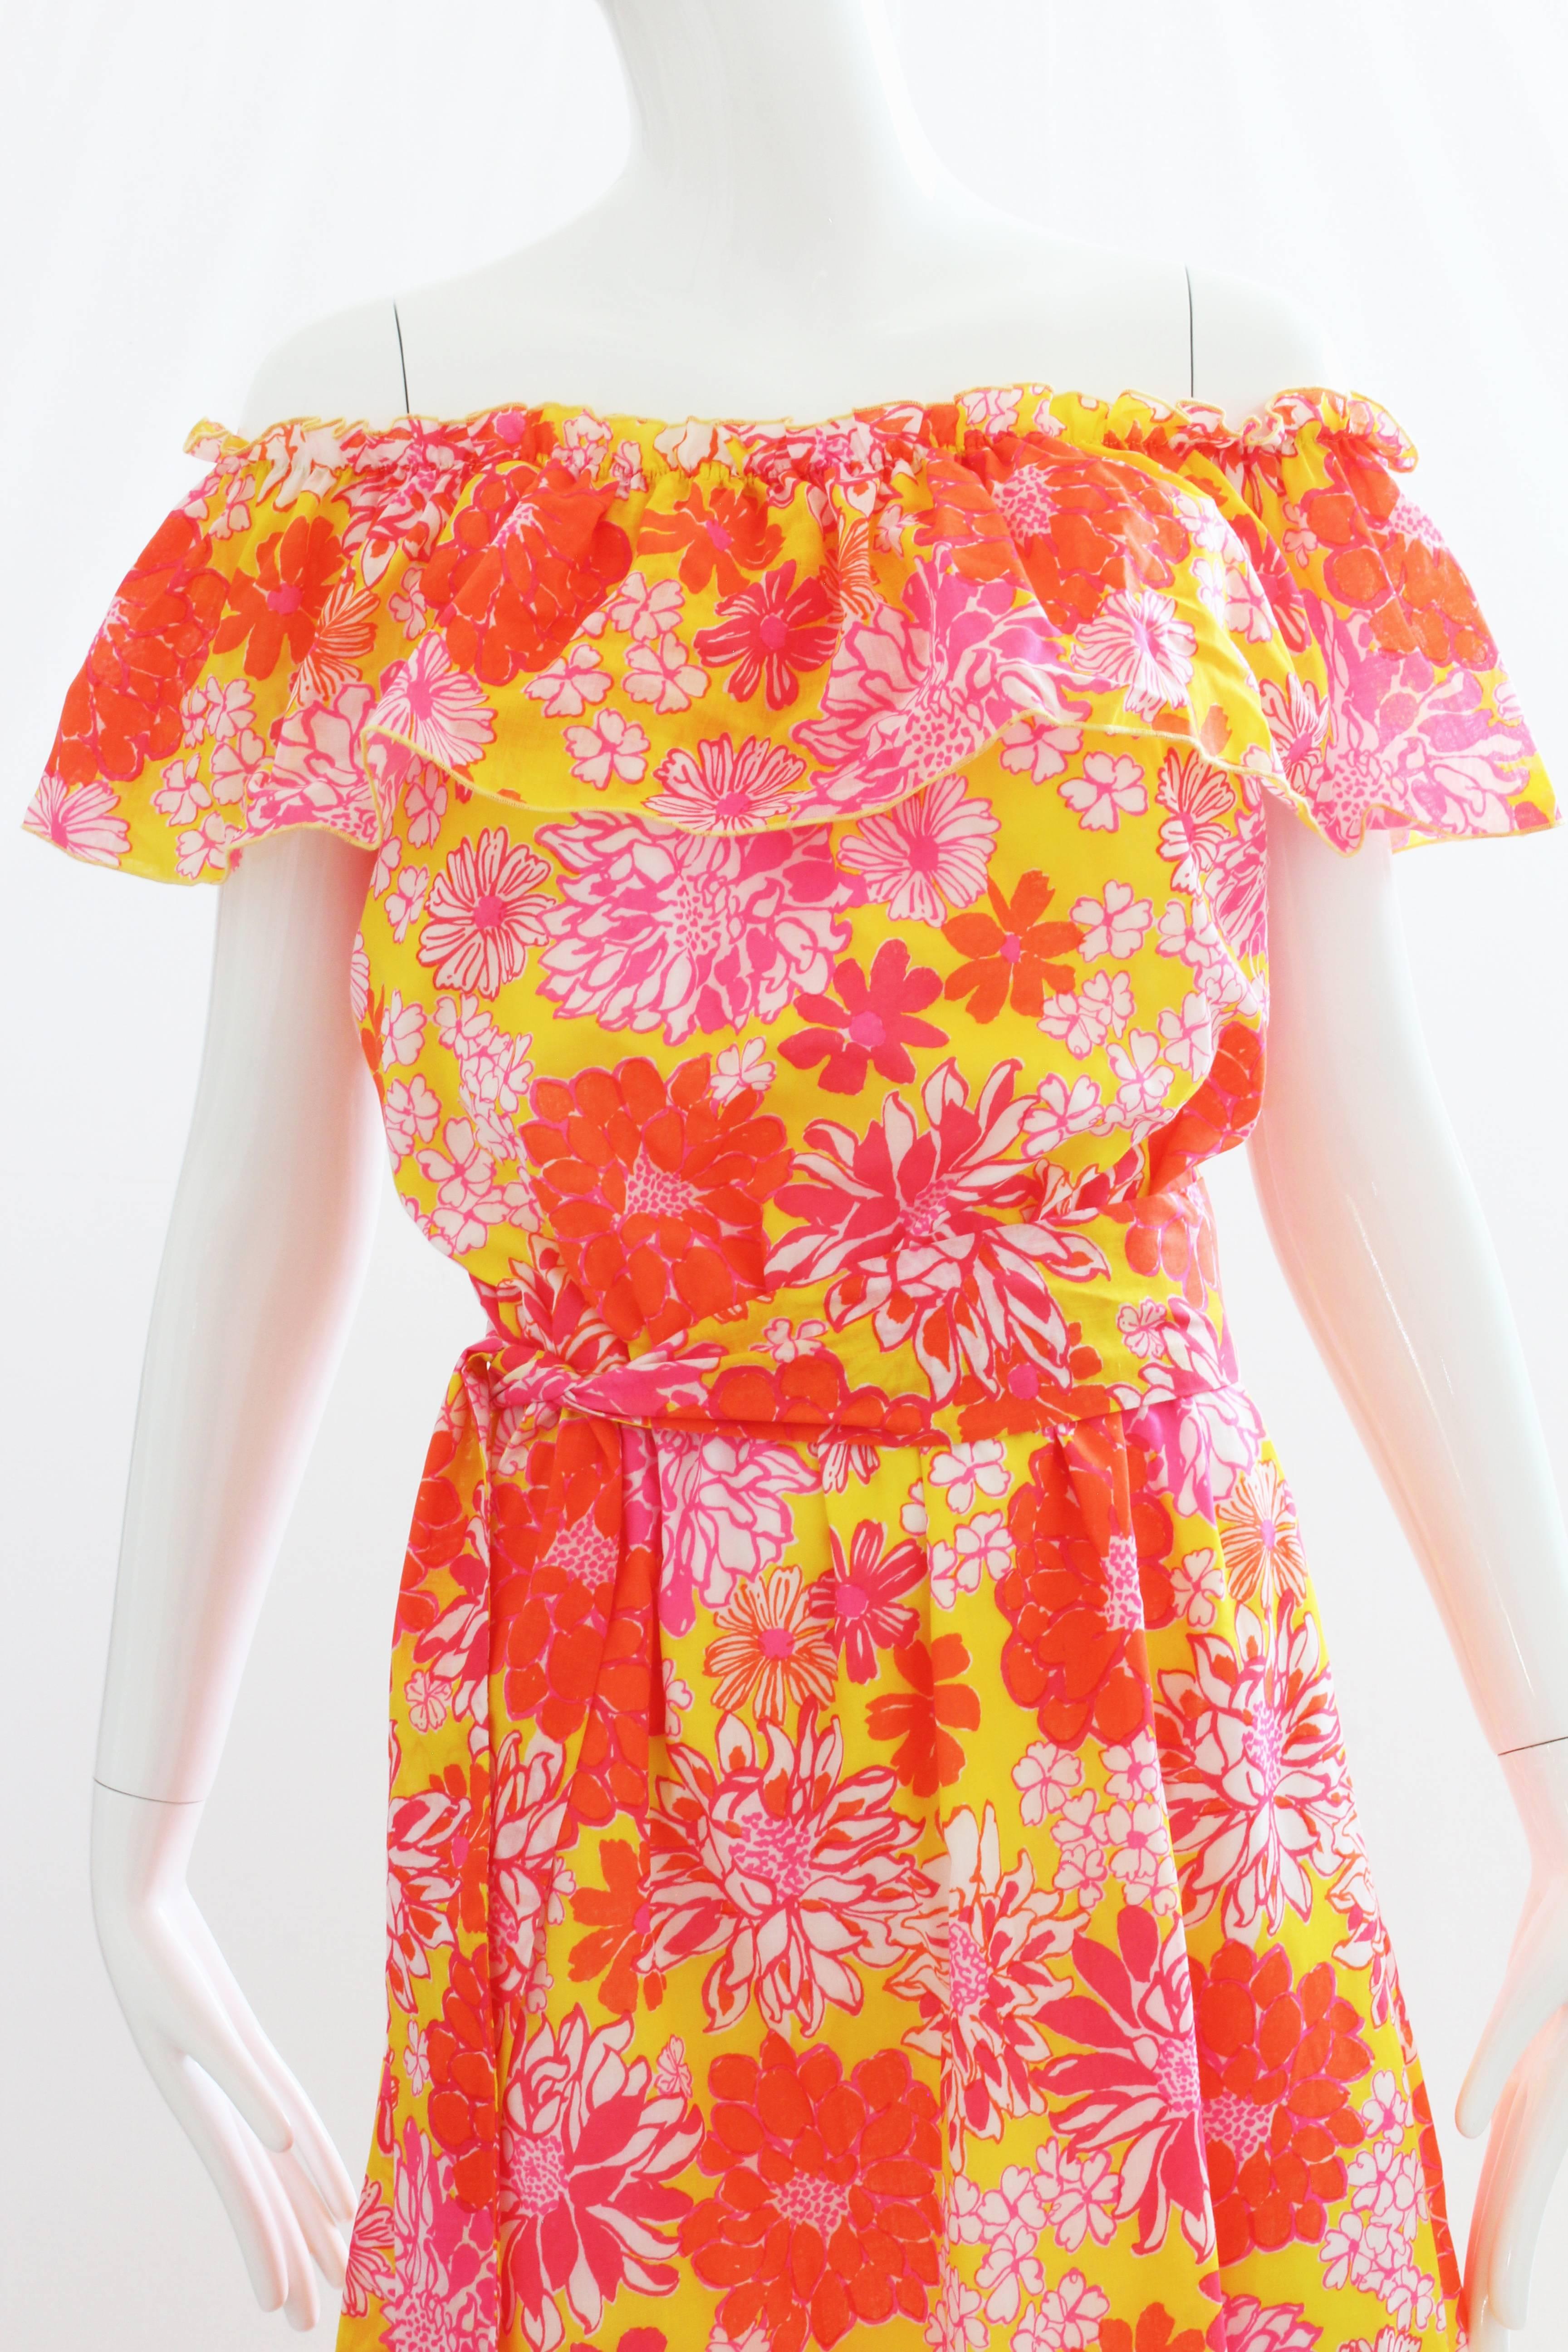 This vibrant print dress was made in the 70s by Lilly Pulitzer for her more youthful LIZA line, named after her daughter. Made from a cotton poly blend, it features a ruffled collar that sits off the shoulder, a full-maxi skirt and a matching belt.